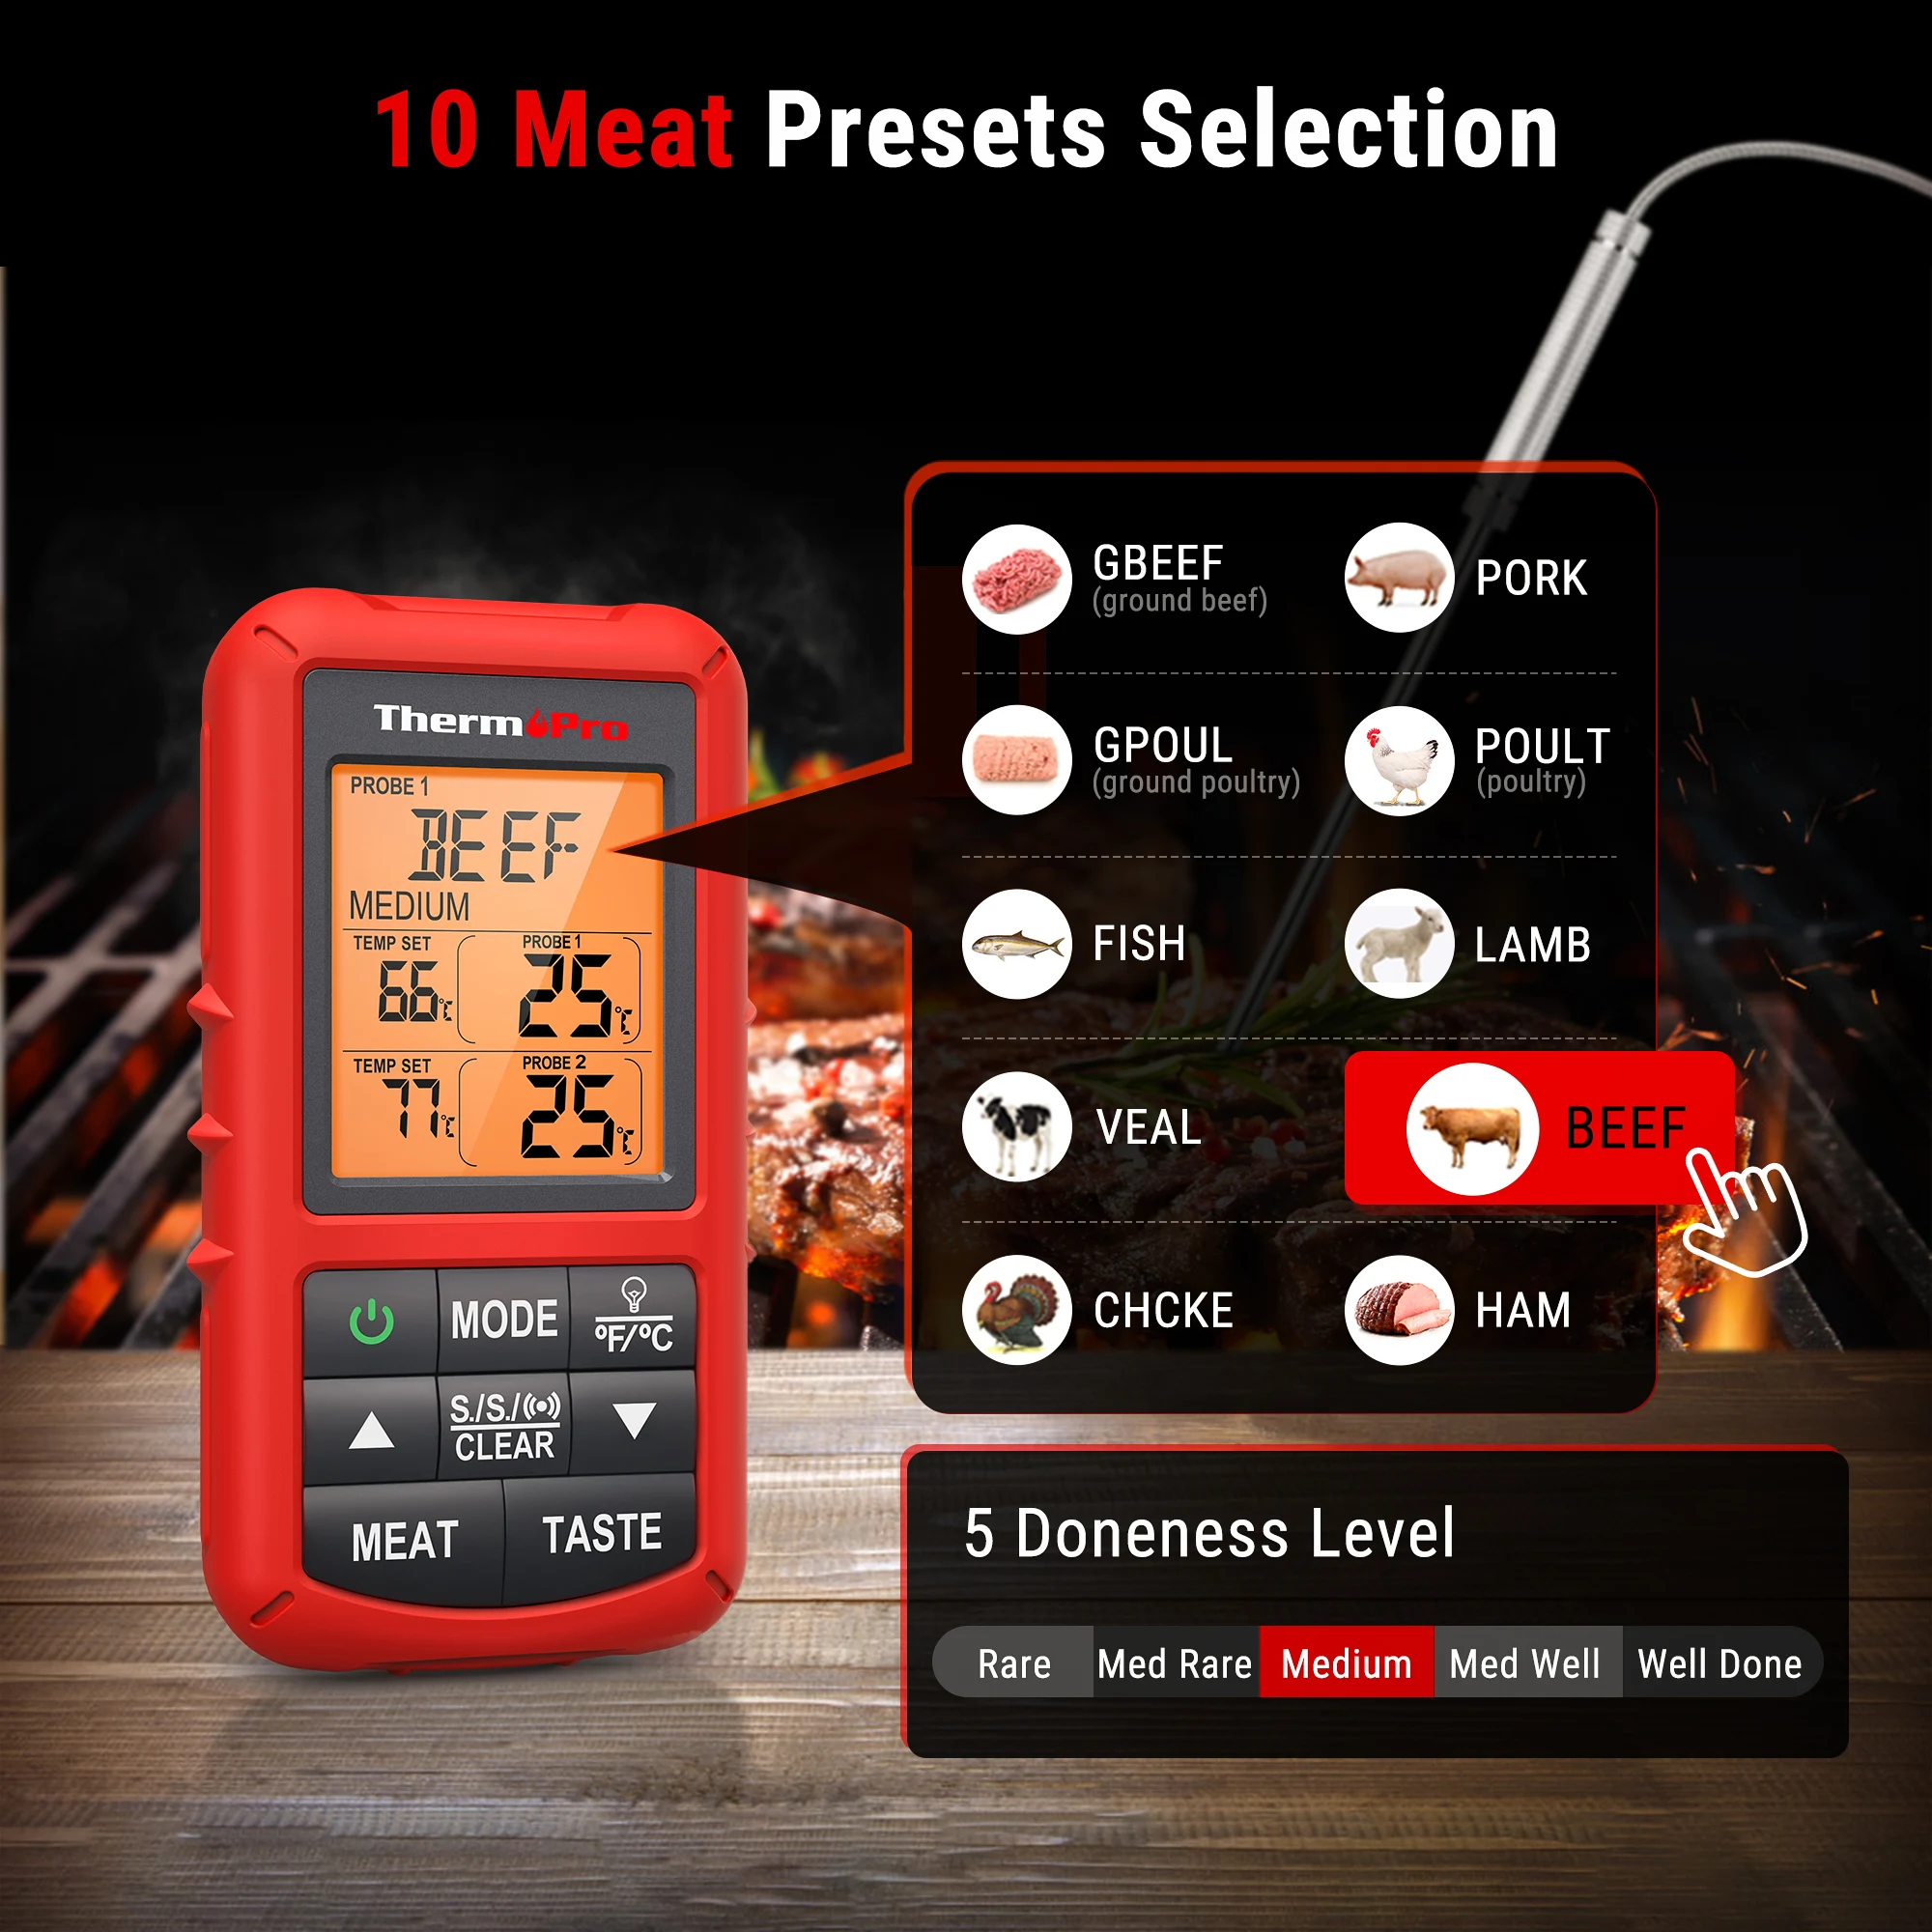 ThermoPro TP20C Wireless 150M Backlight LCD Display Digital Kitchen Cooking BBQ Oven Meat Thermometer With Timer Function